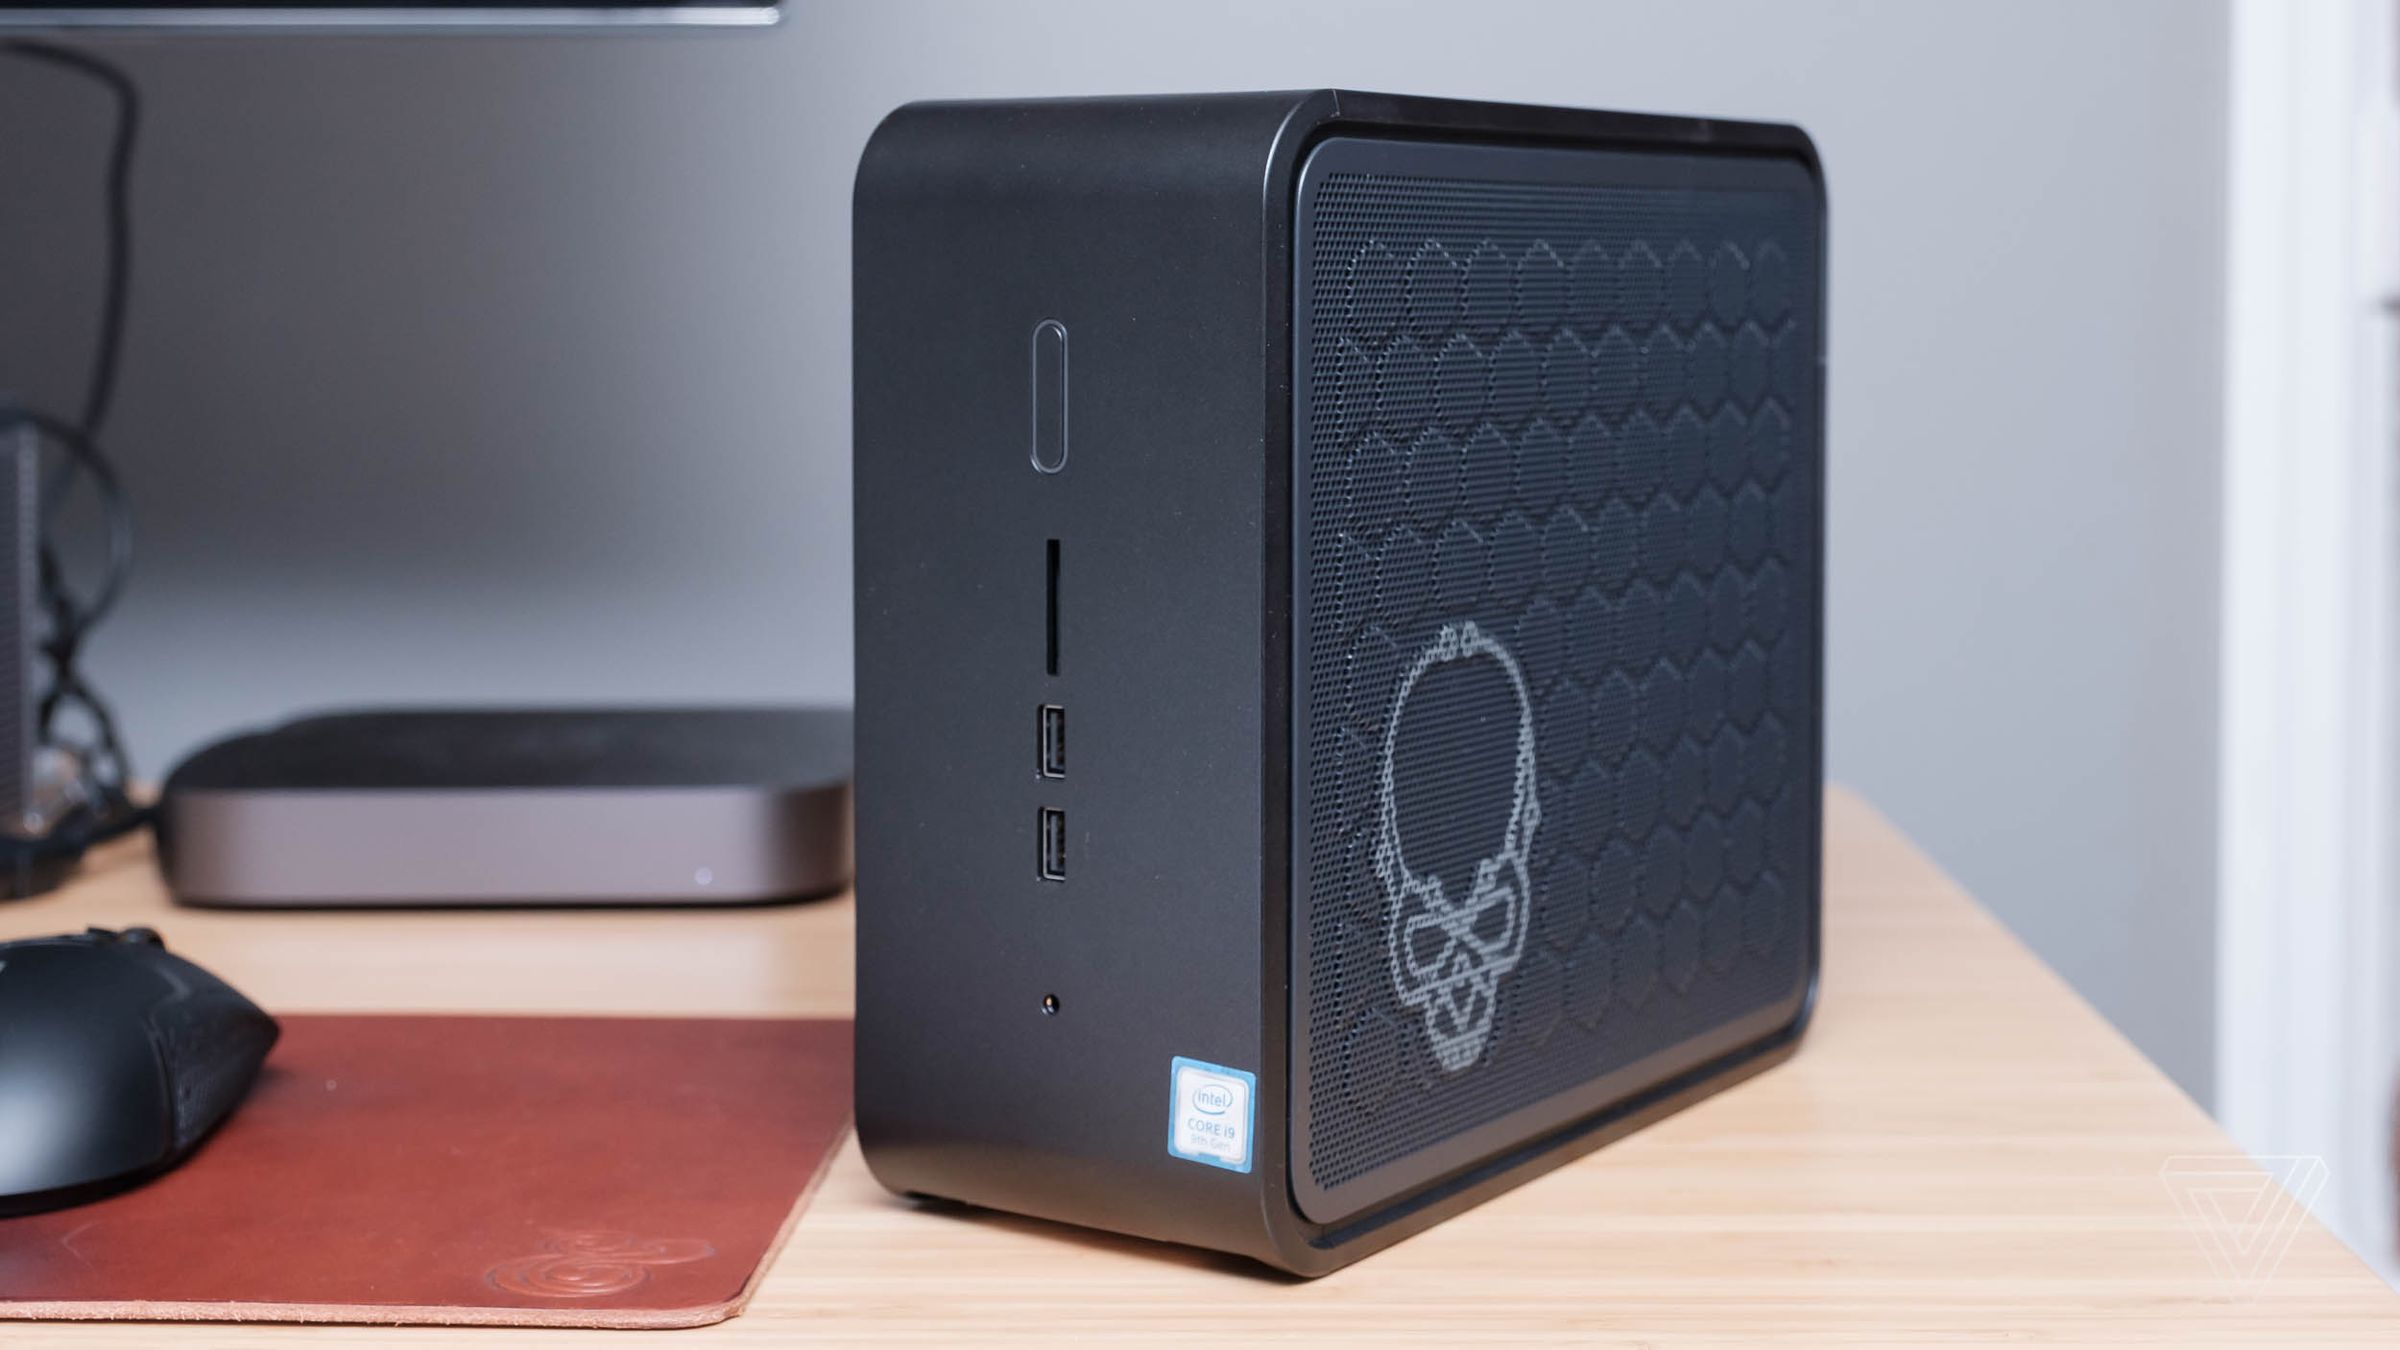 Intel NUC 9 computer standing vertically on a wood desk with a skull etched on the side and a gray Mac Mini in the background